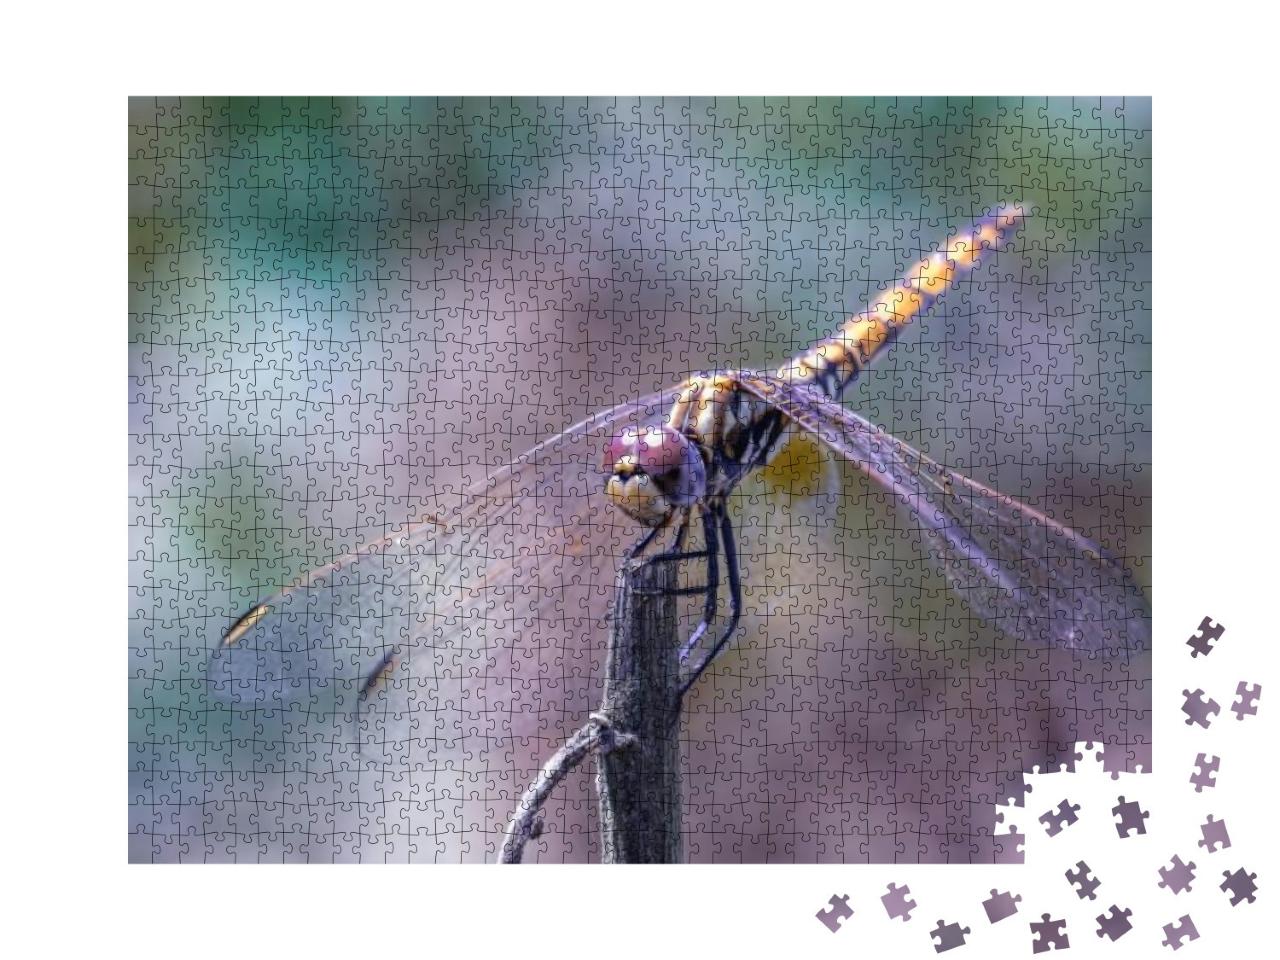 Macro Image of a Dragonfly, Odonata, Perched on a... Jigsaw Puzzle with 1000 pieces